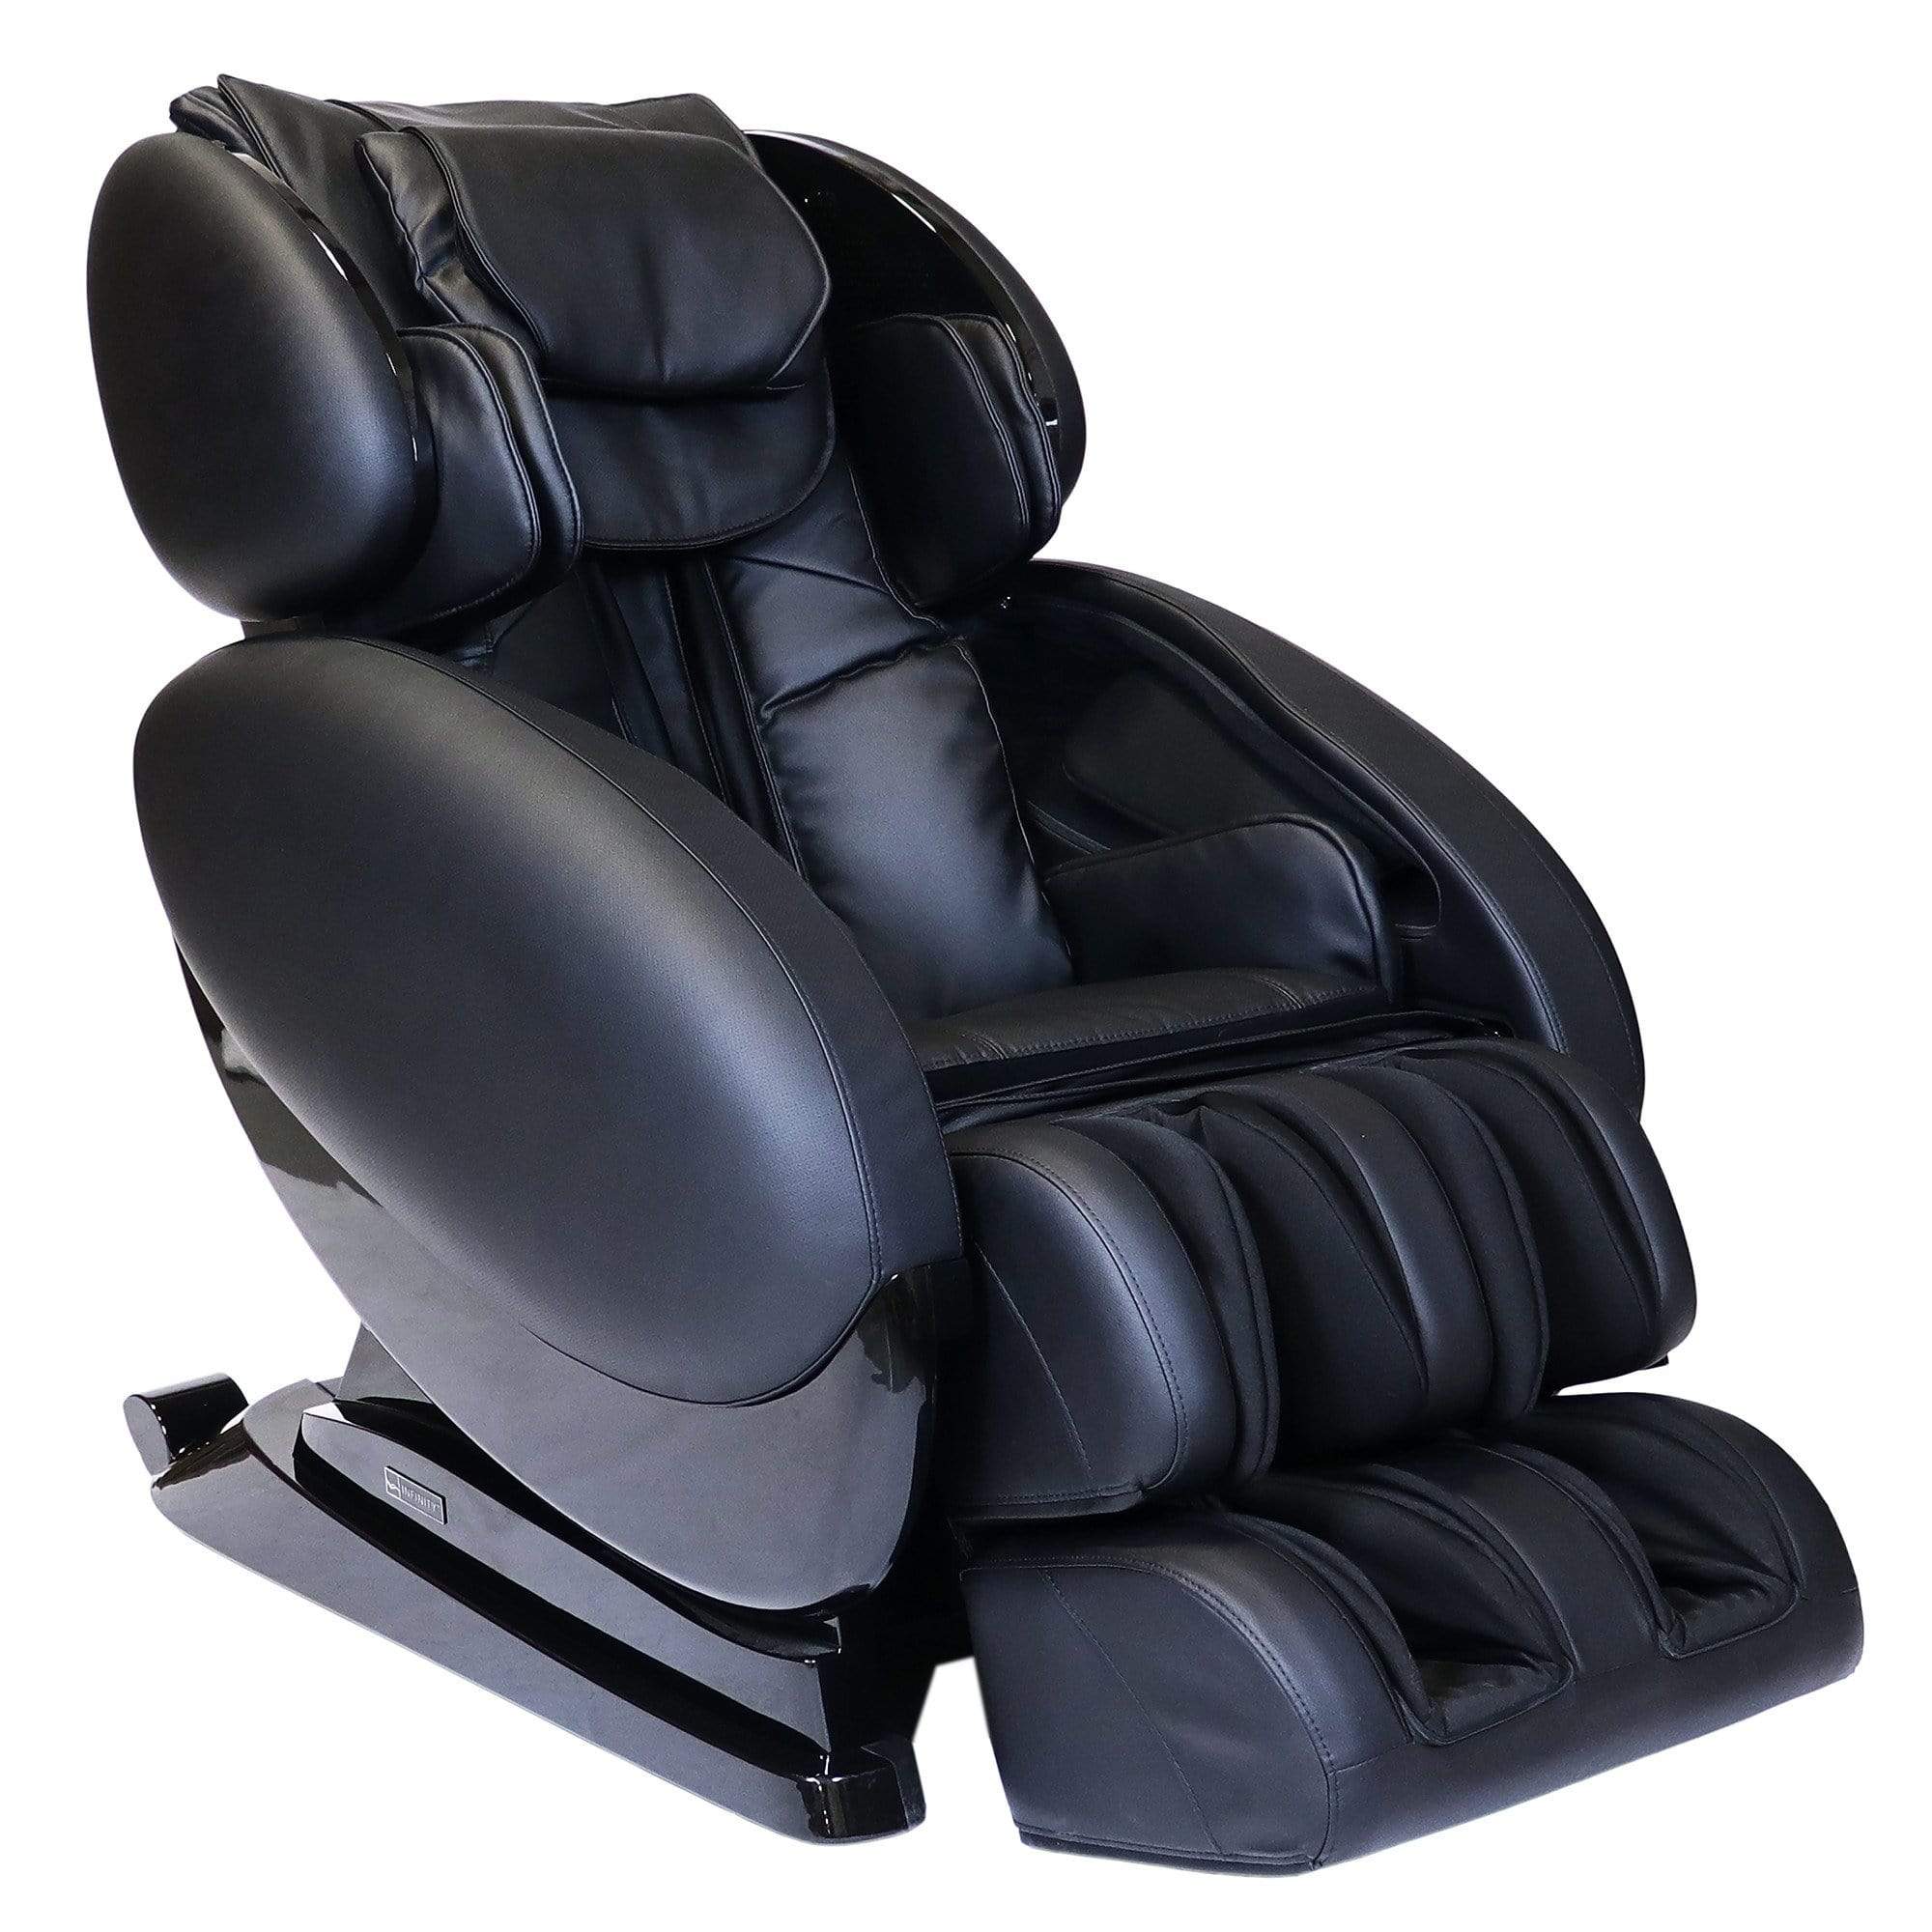 Infinity Massage Chair Black / White Glove Delivery and Setup  $ 599 / Free 5 Year Limited Warranty Infinity IT-8500 Plus Massage Chair 18500101